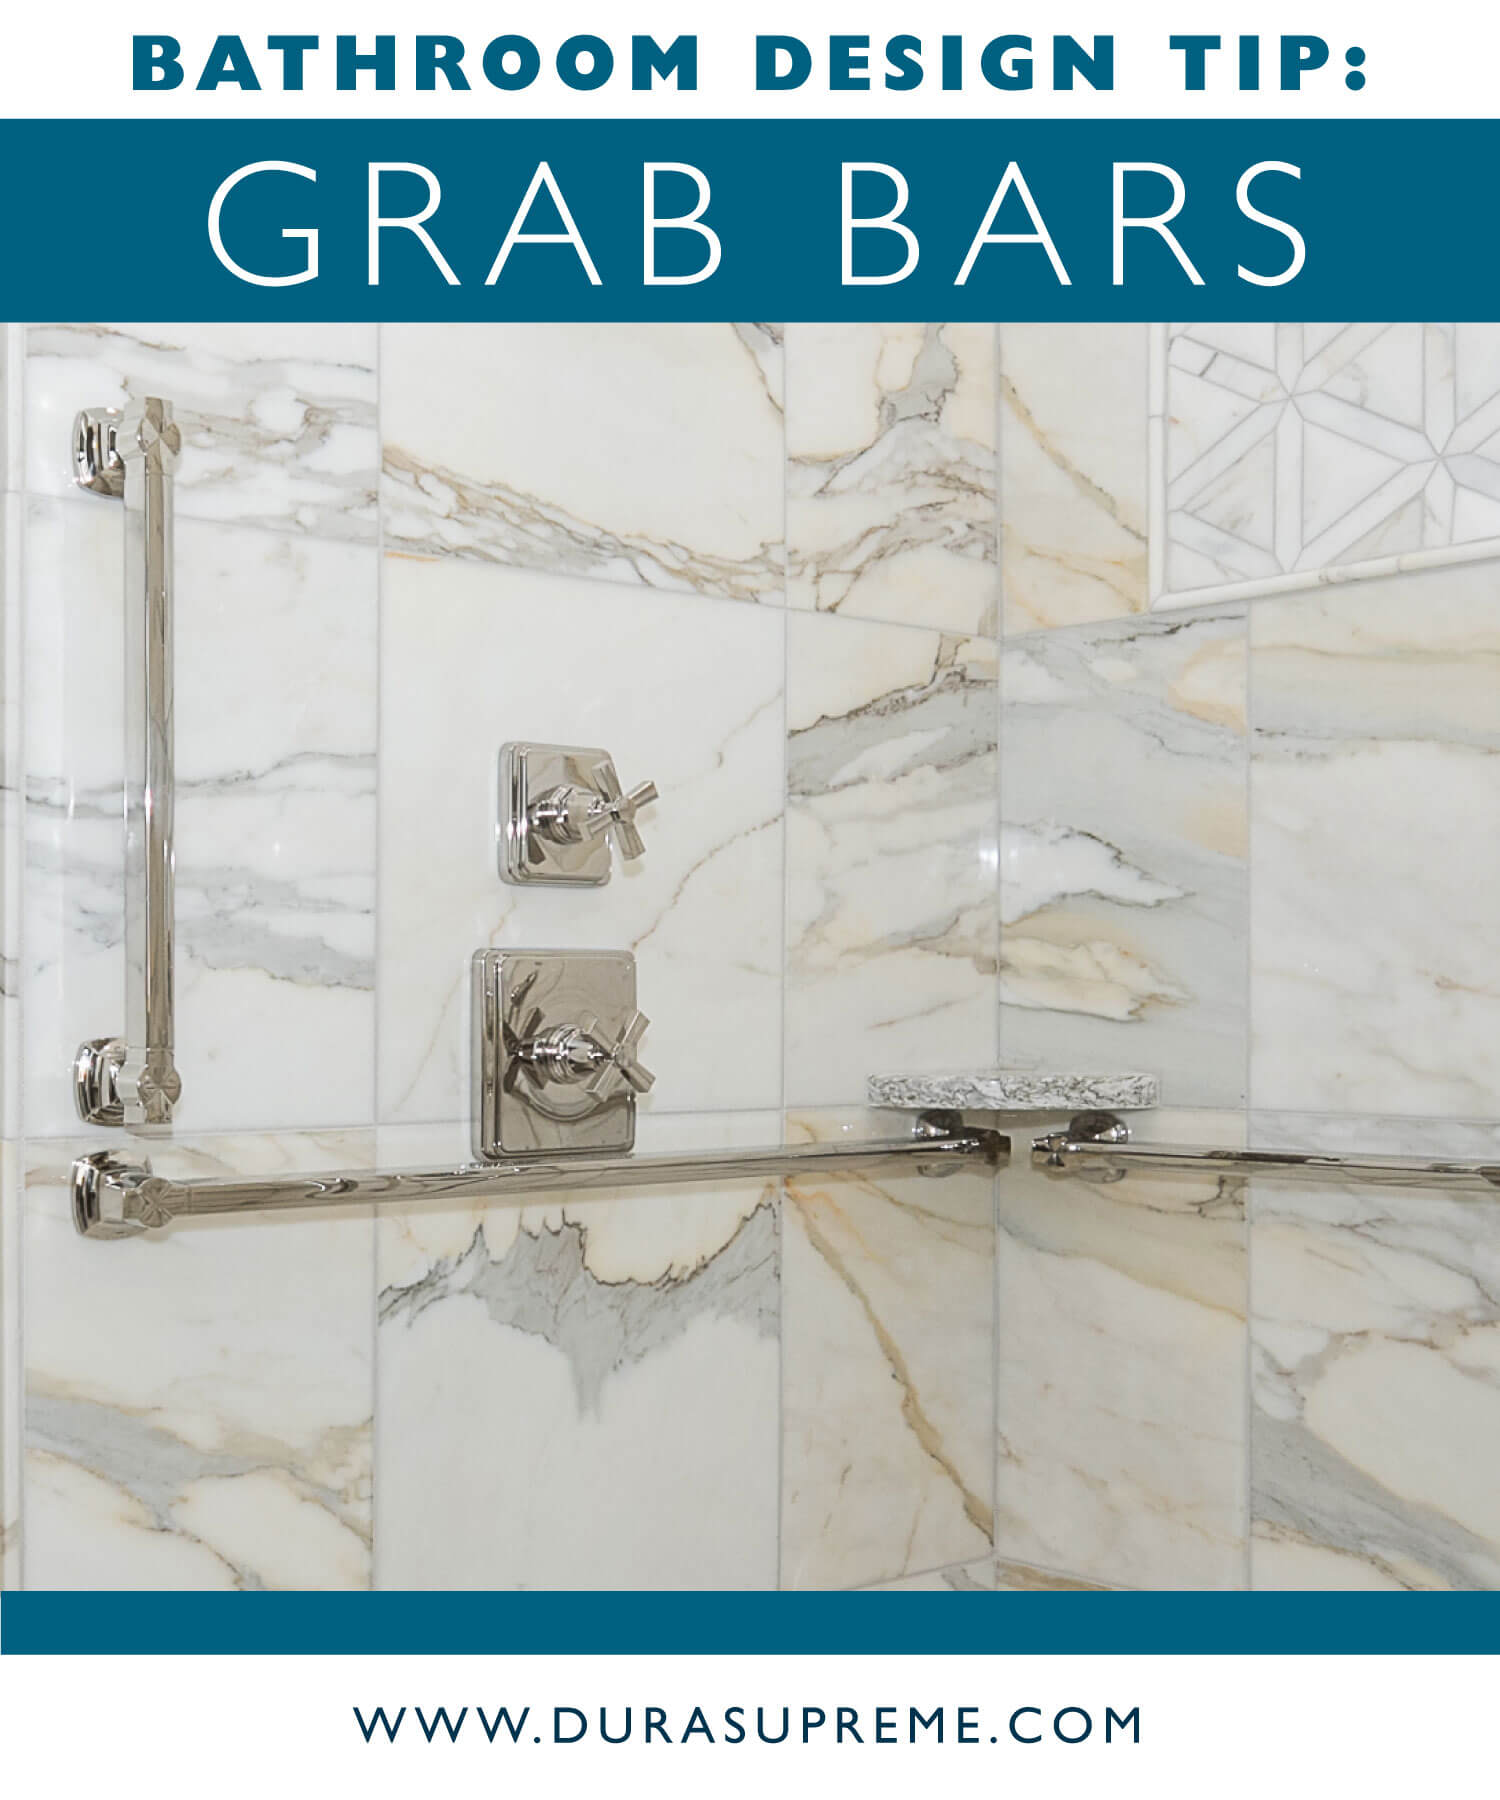 Bathroom Design Tips and Rules for Accessible Grab Bars in the Shower. Image showing the NKBA Grab Bar guideline. Design by Pinnacle Design. Photo by Dan Denardo.